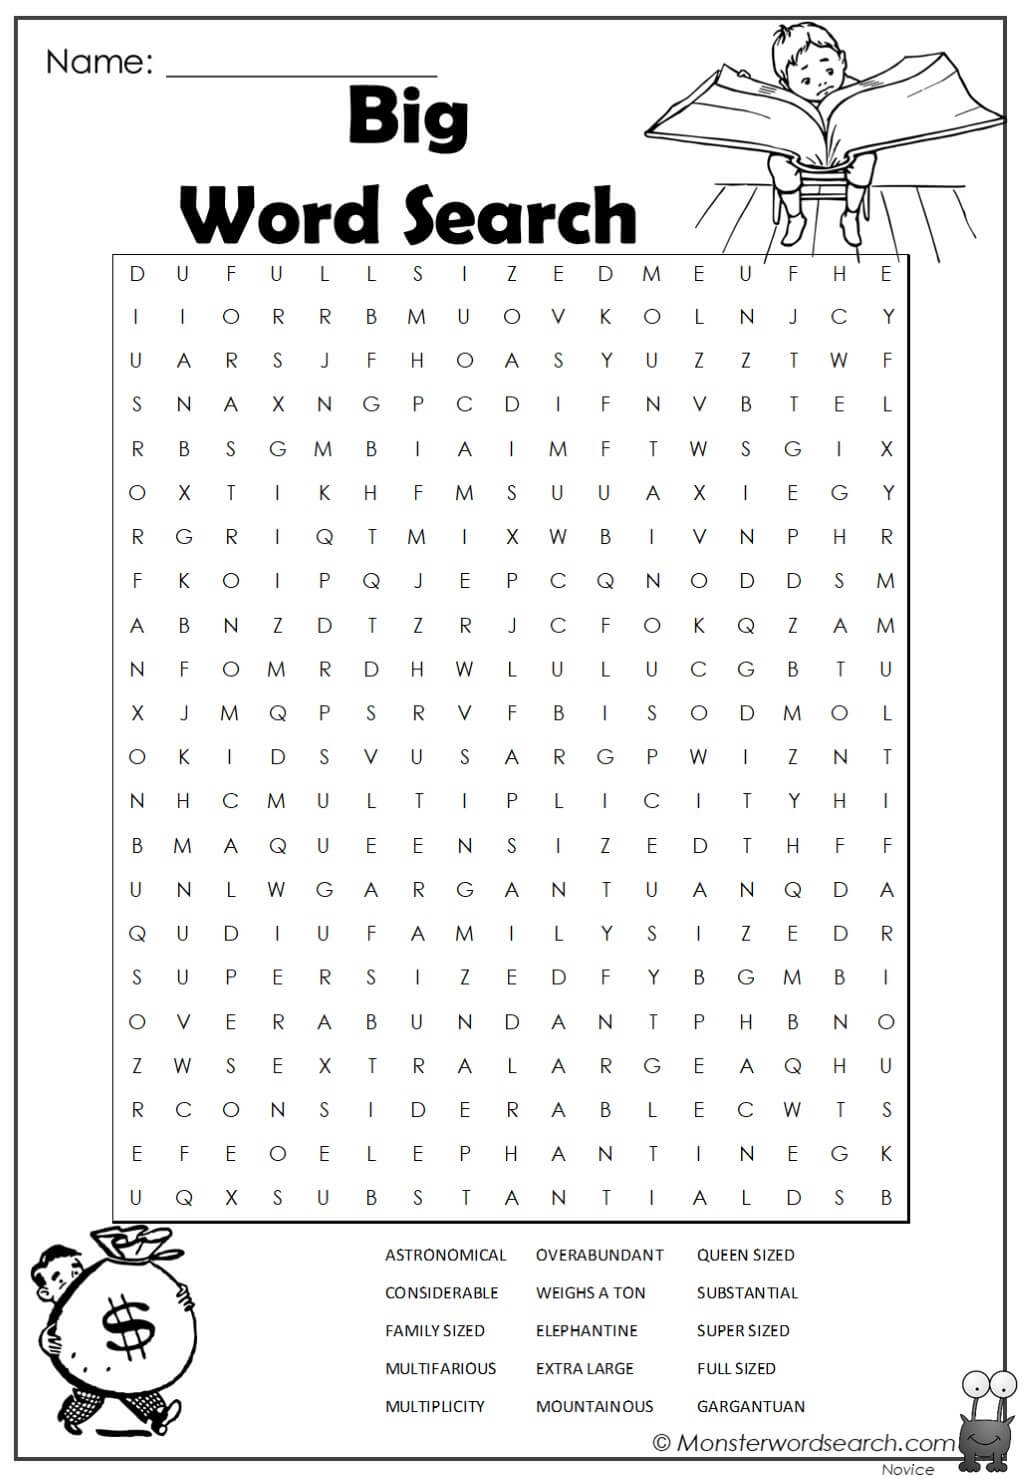 big word search 1jpg monster word search